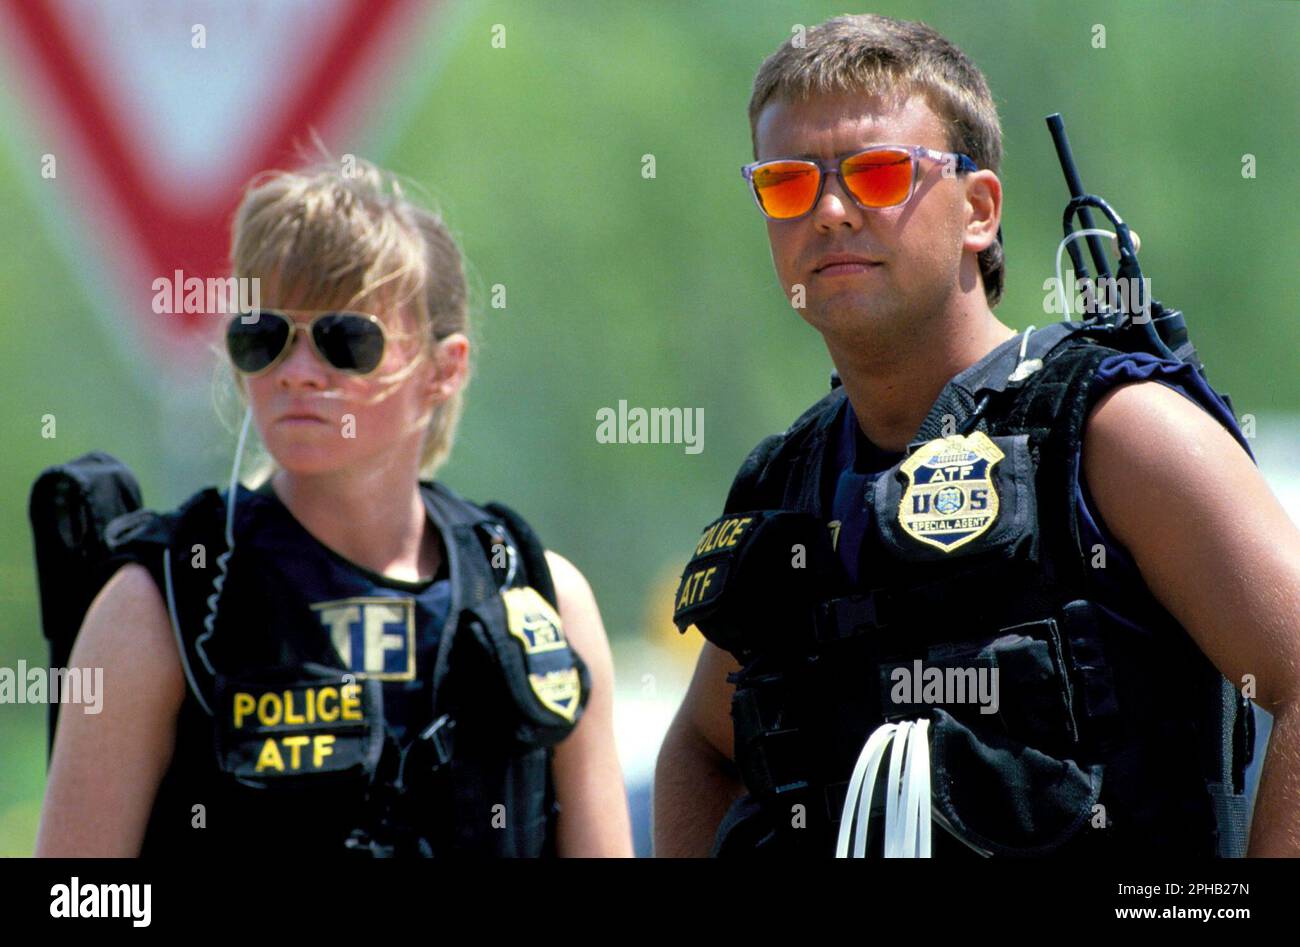 Waco, Texas USA, April 1993: Agents in the Bureau of Alcohol, Tobacco and Firearms (ATF) wear bulletproofs vest and sunglasses during the standoff between law enforcement agencies and the Branch Davidian religions group. ©Bob Daemmrich Stock Photo